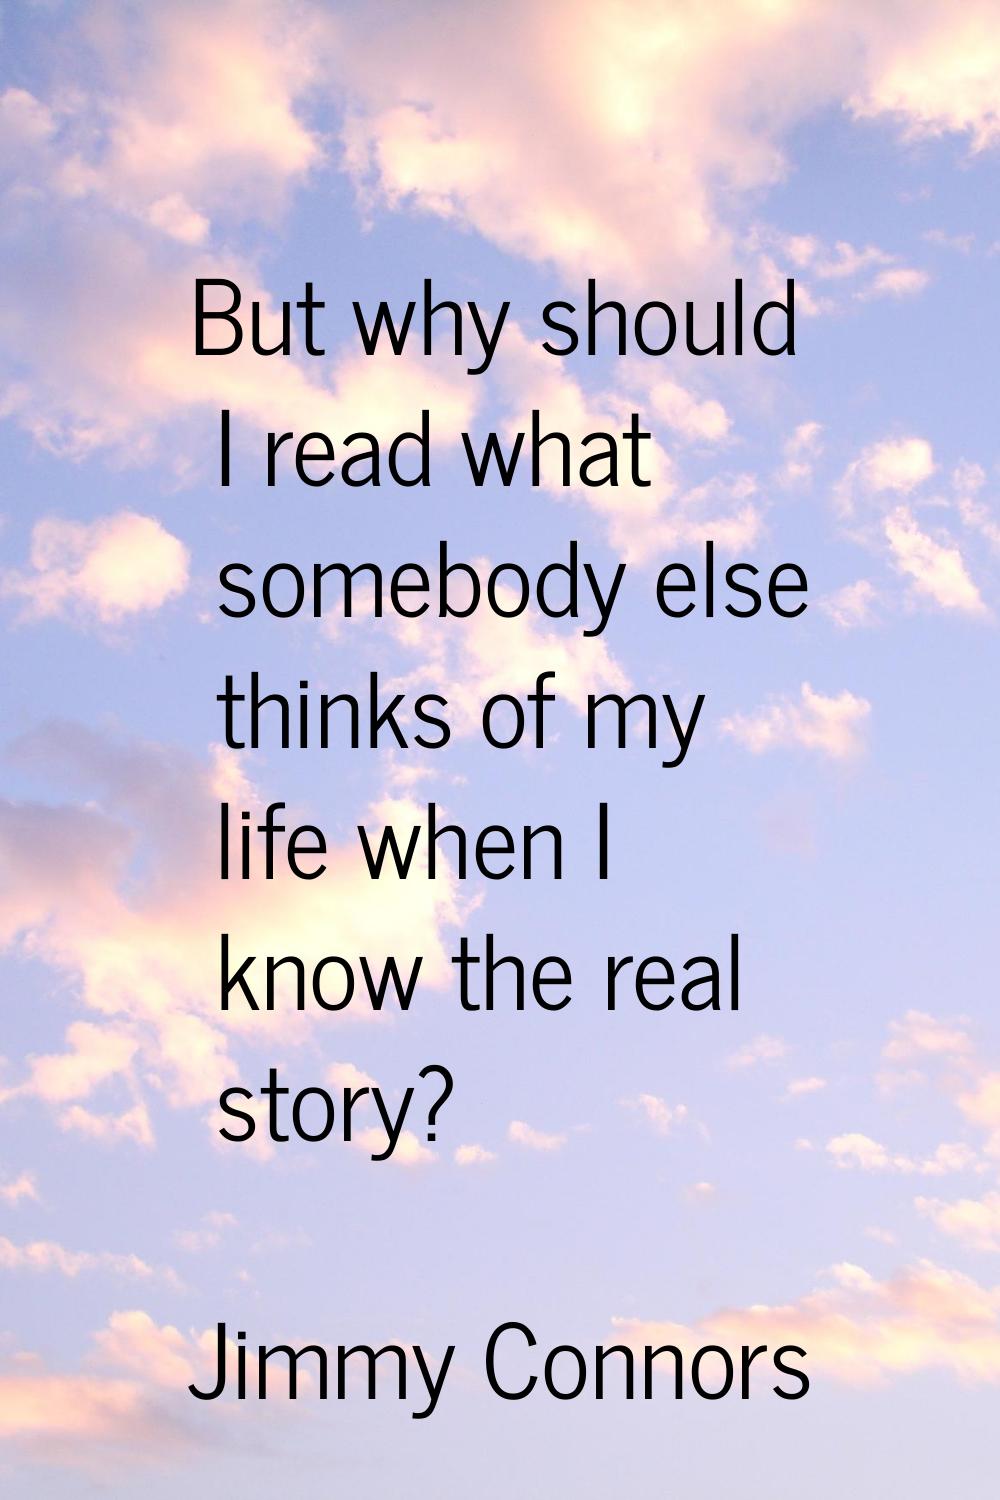 But why should I read what somebody else thinks of my life when I know the real story?